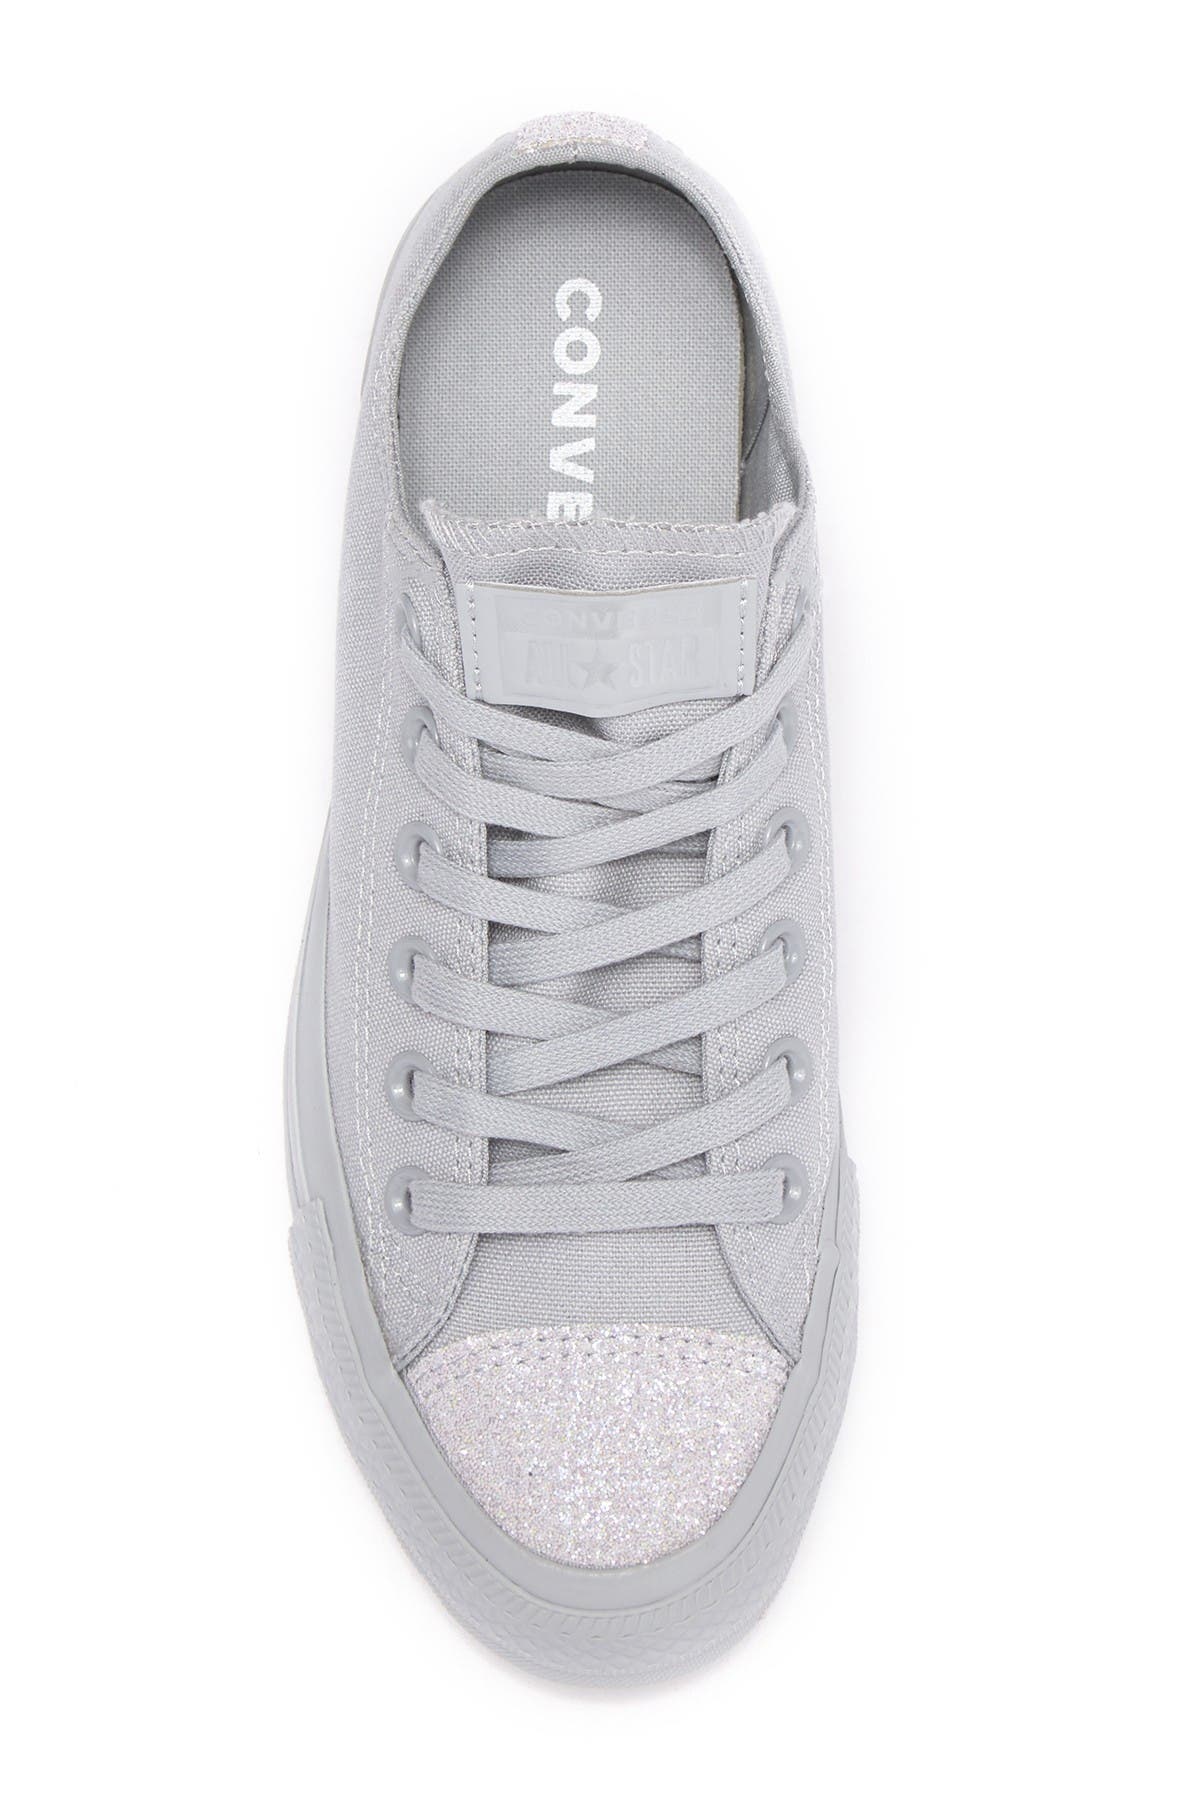 womens converse white all star glitter ox trainers